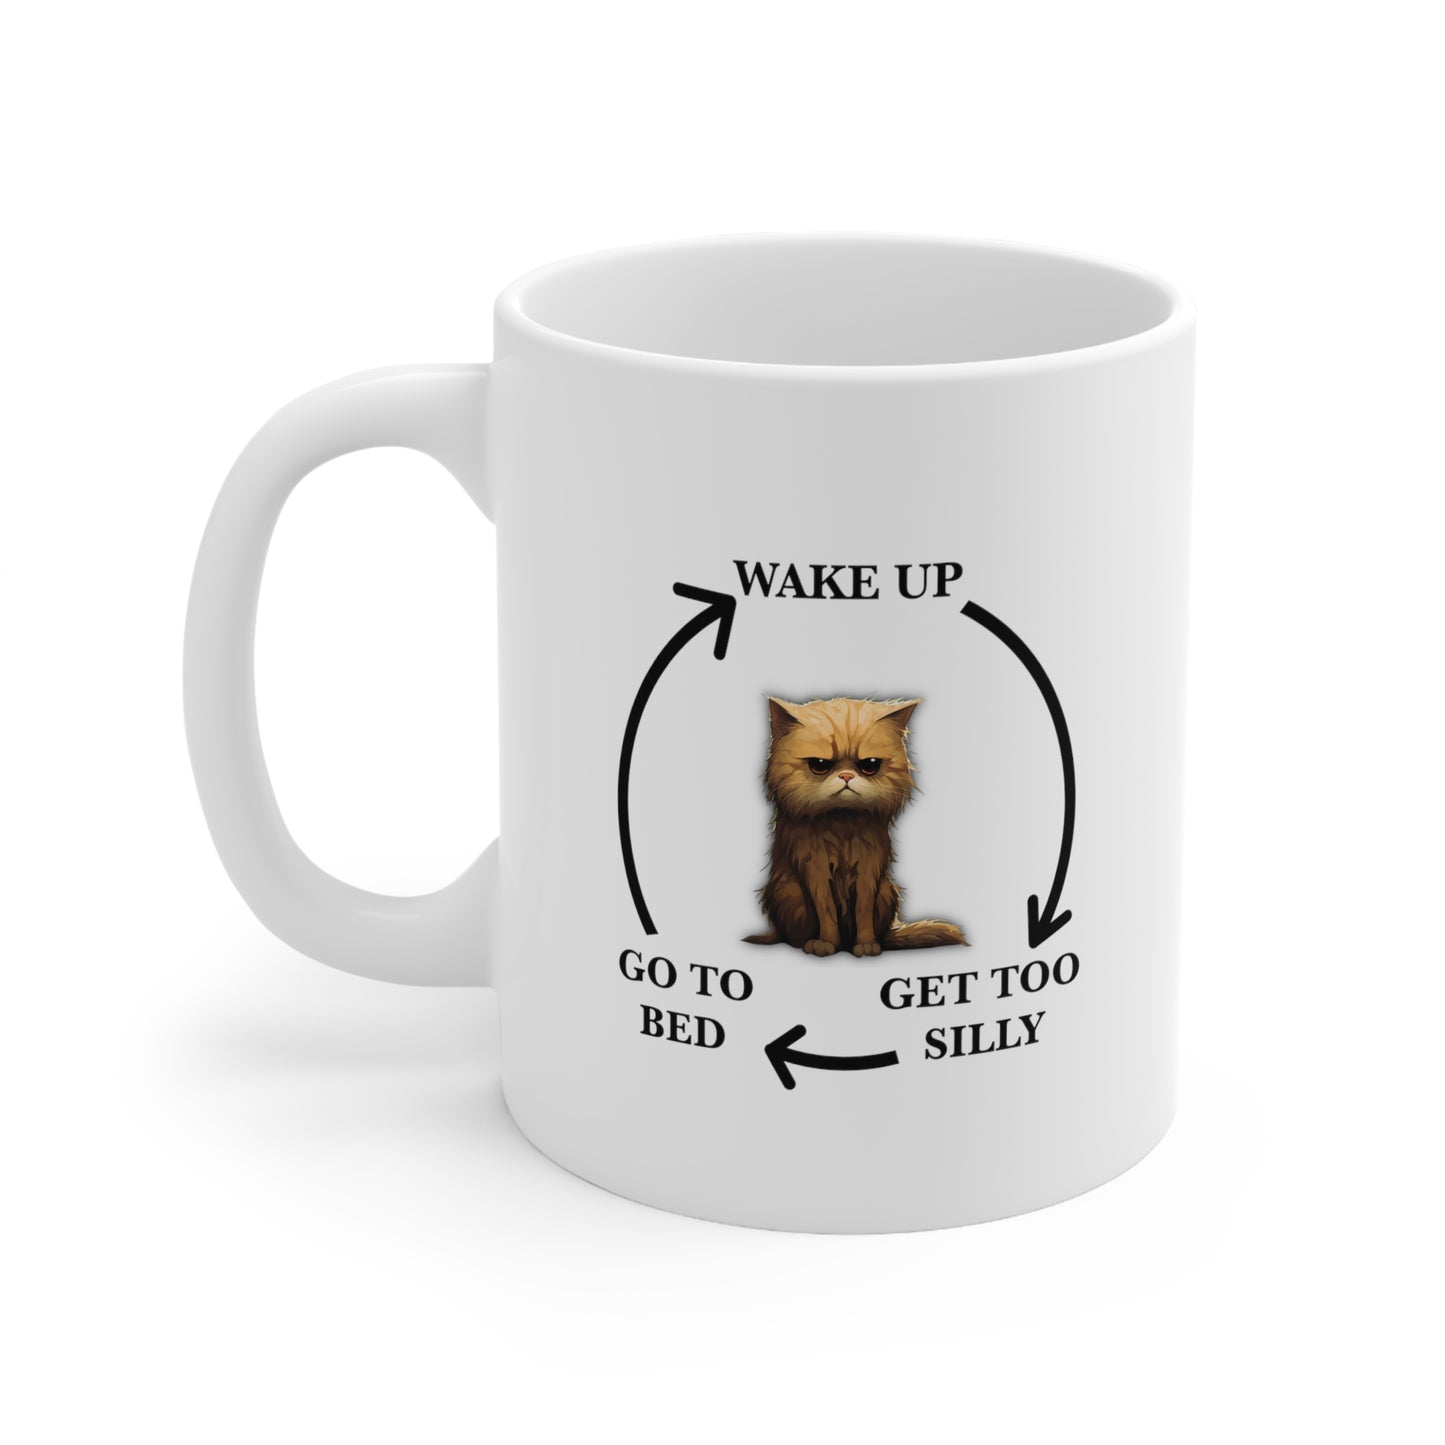 Wake up, Get too silly, go to bed Mug